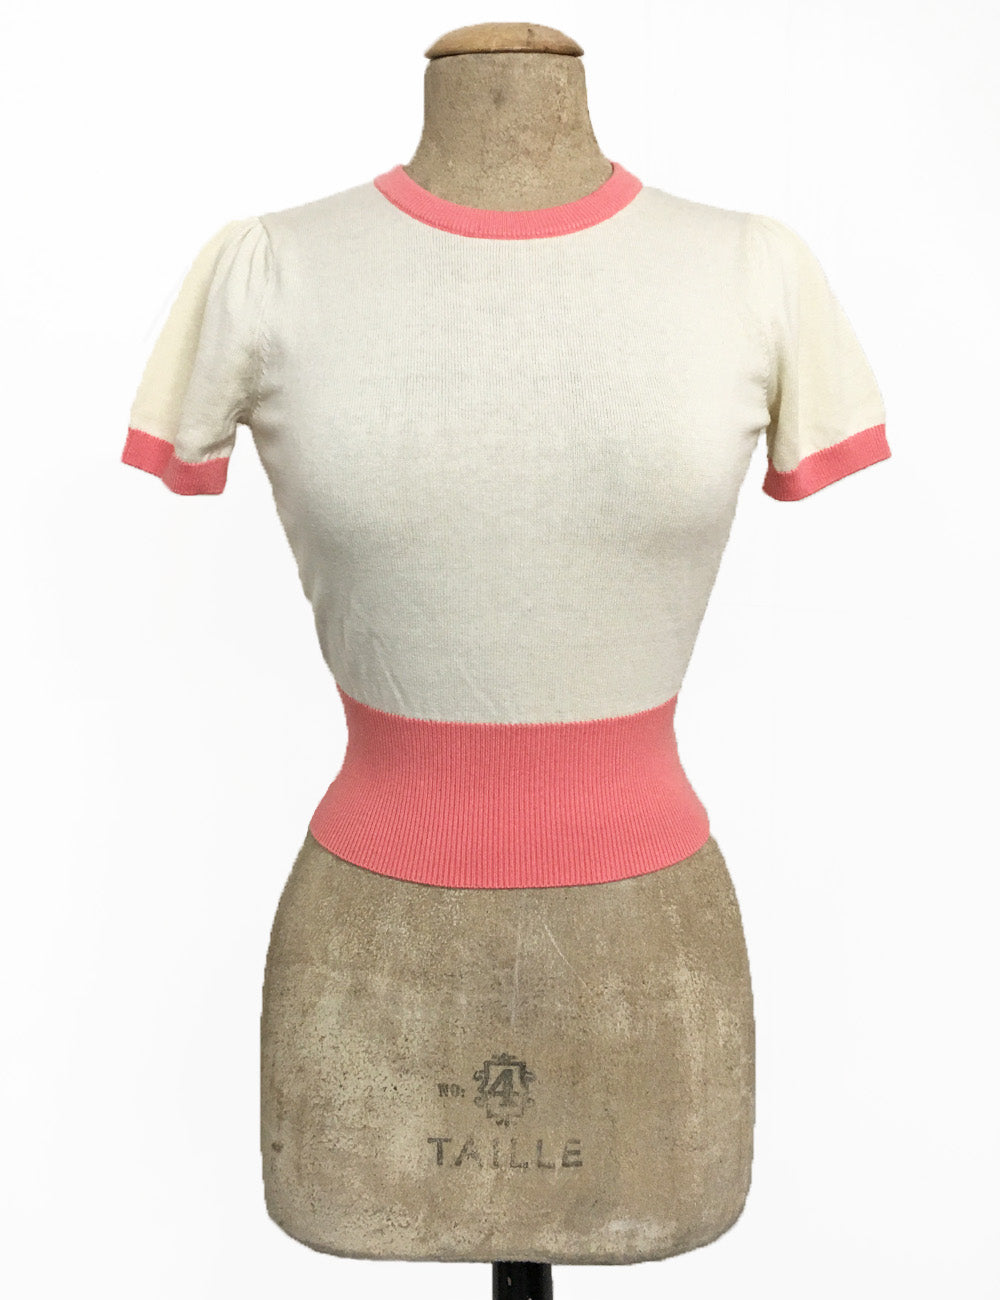 Peaches & Cream 1940s Style Eve Knit Sweater Top